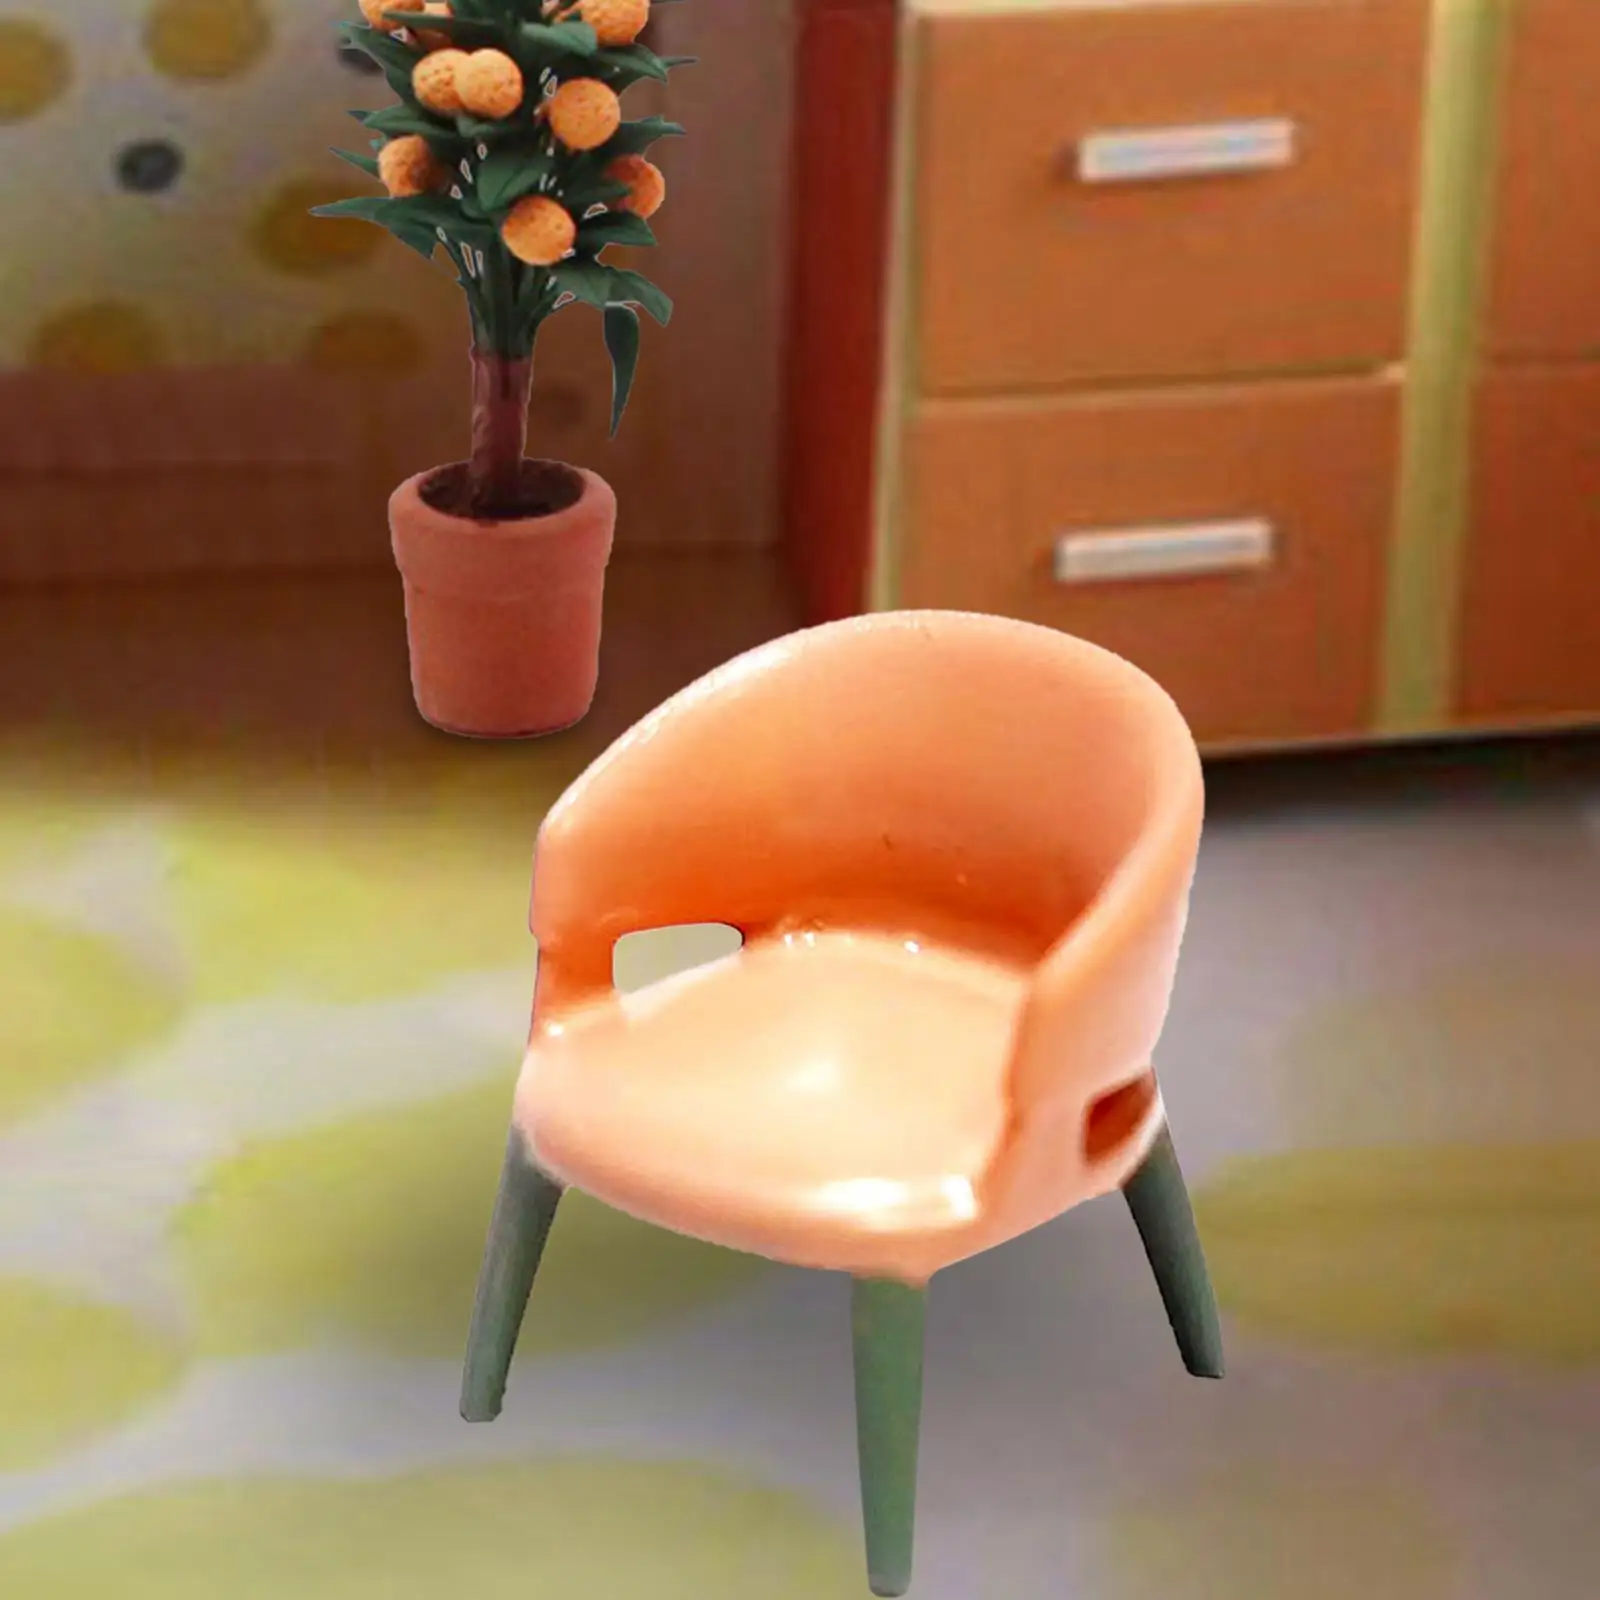 1/87 Tiny Chairs, Miniature 1/87 Scale Armchair, 1/87 Scale Chair Model for DIY Projects Decor